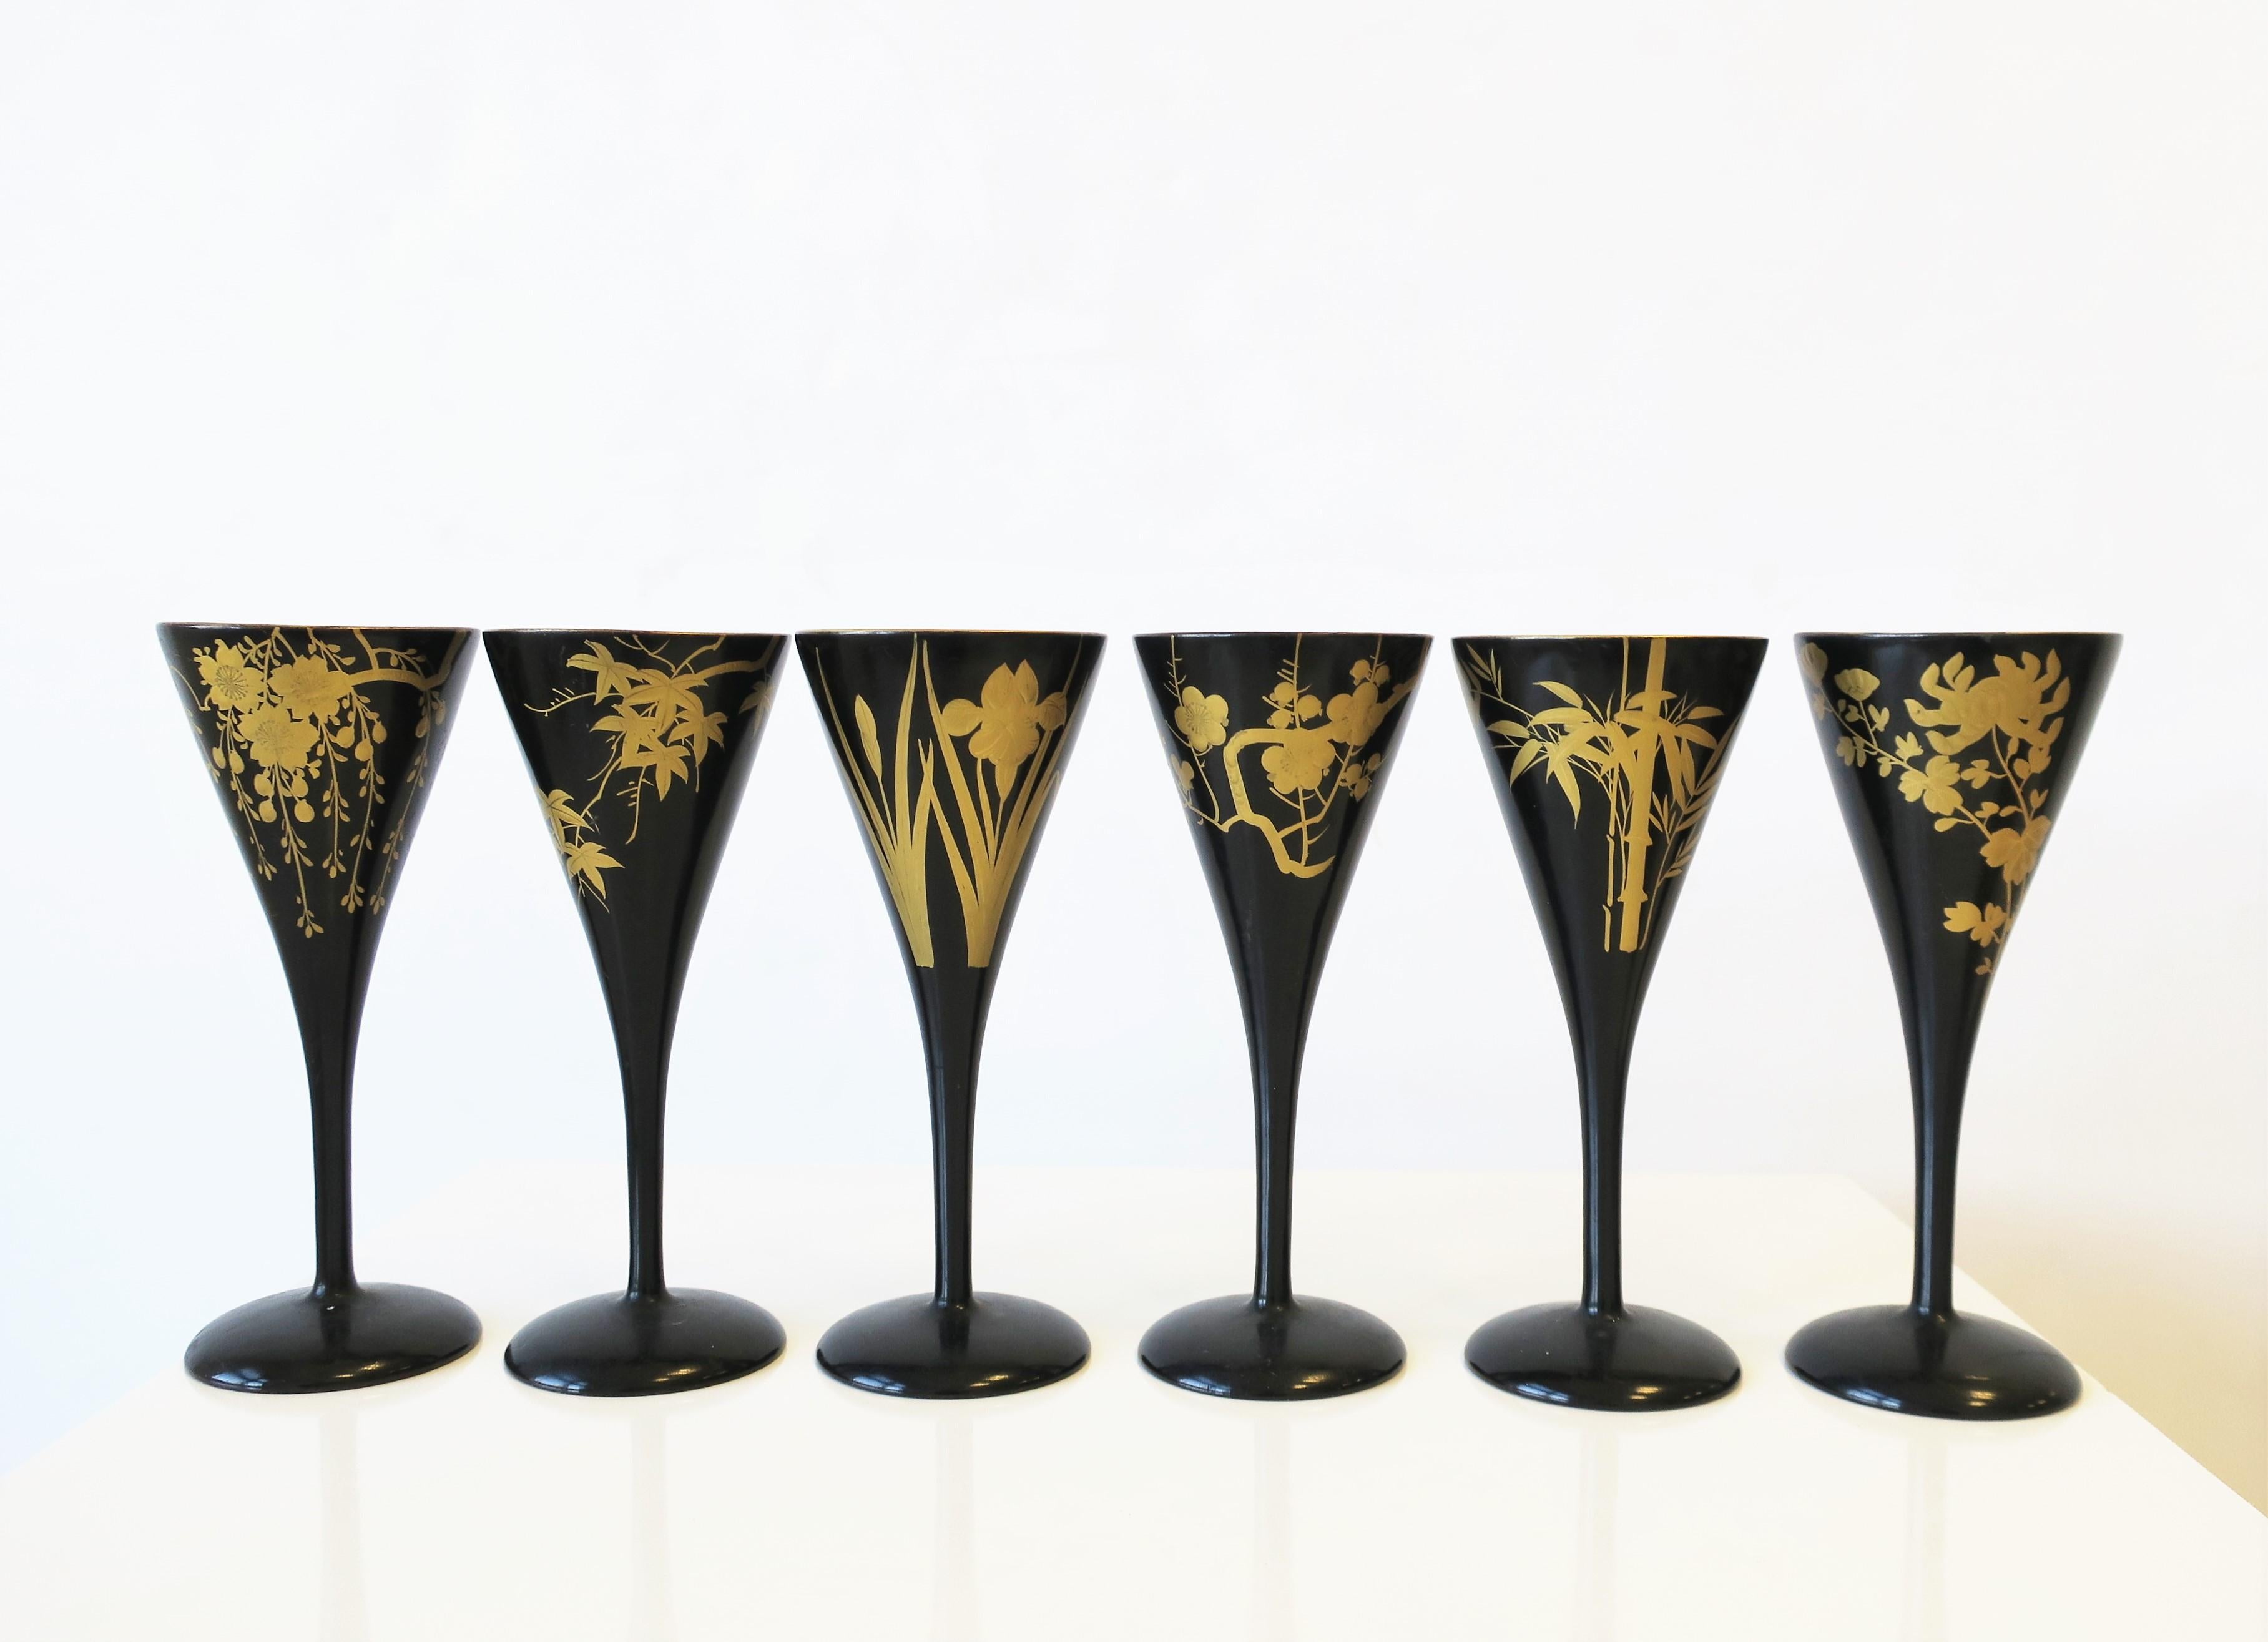 A very beautiful set of six (6) Japanese black lacquer and gold sake, Champagne flutes, or wine stemware glasses, circa 20th century, Japan. Each with a different botanical design in gold (a slightly raised relief.) Dimensions: 2.5